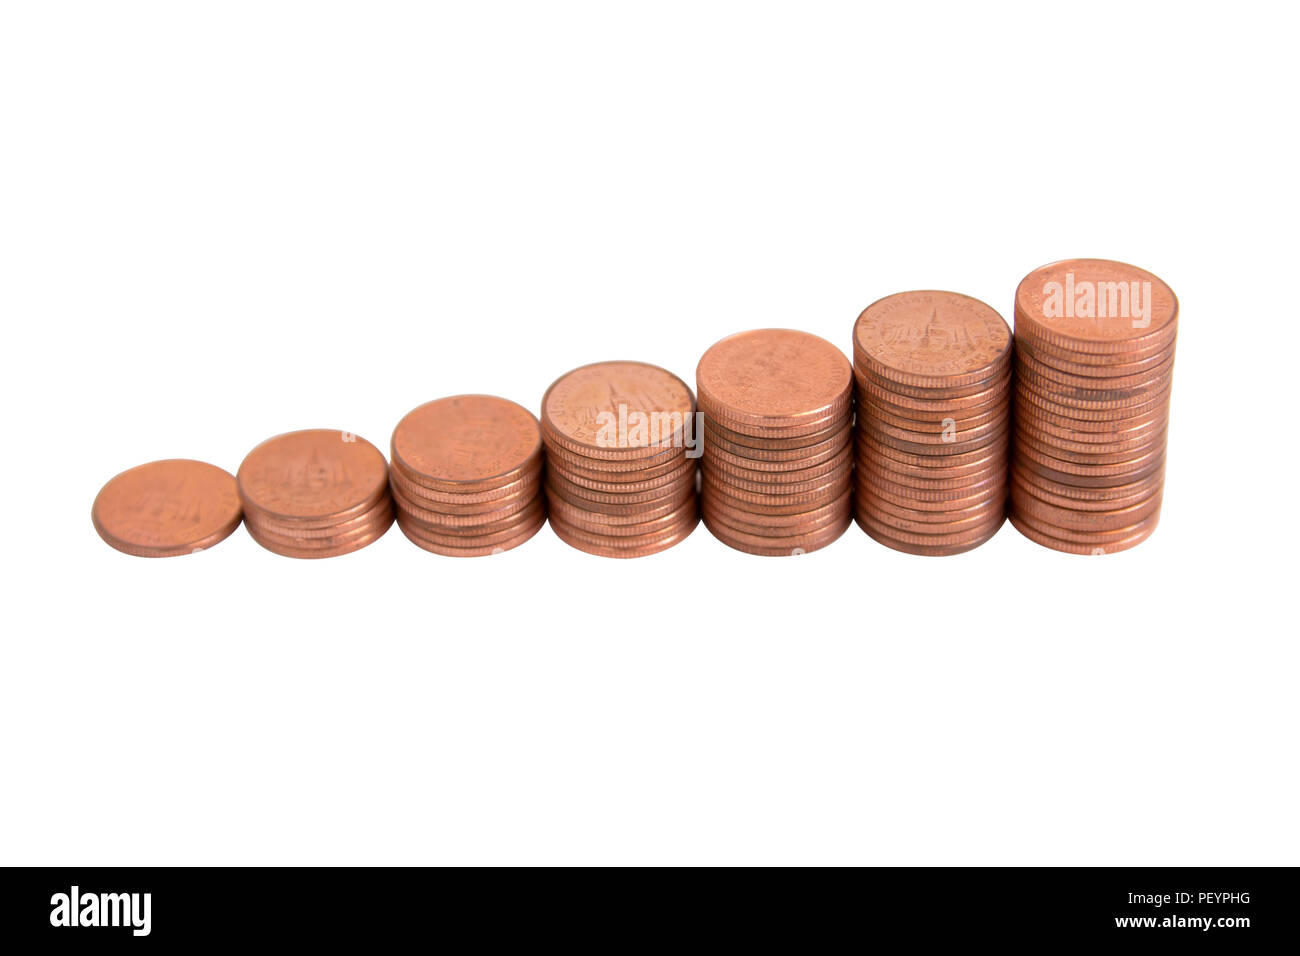 Stacks of copper coins isolated on white background with clipping path Stock Photo